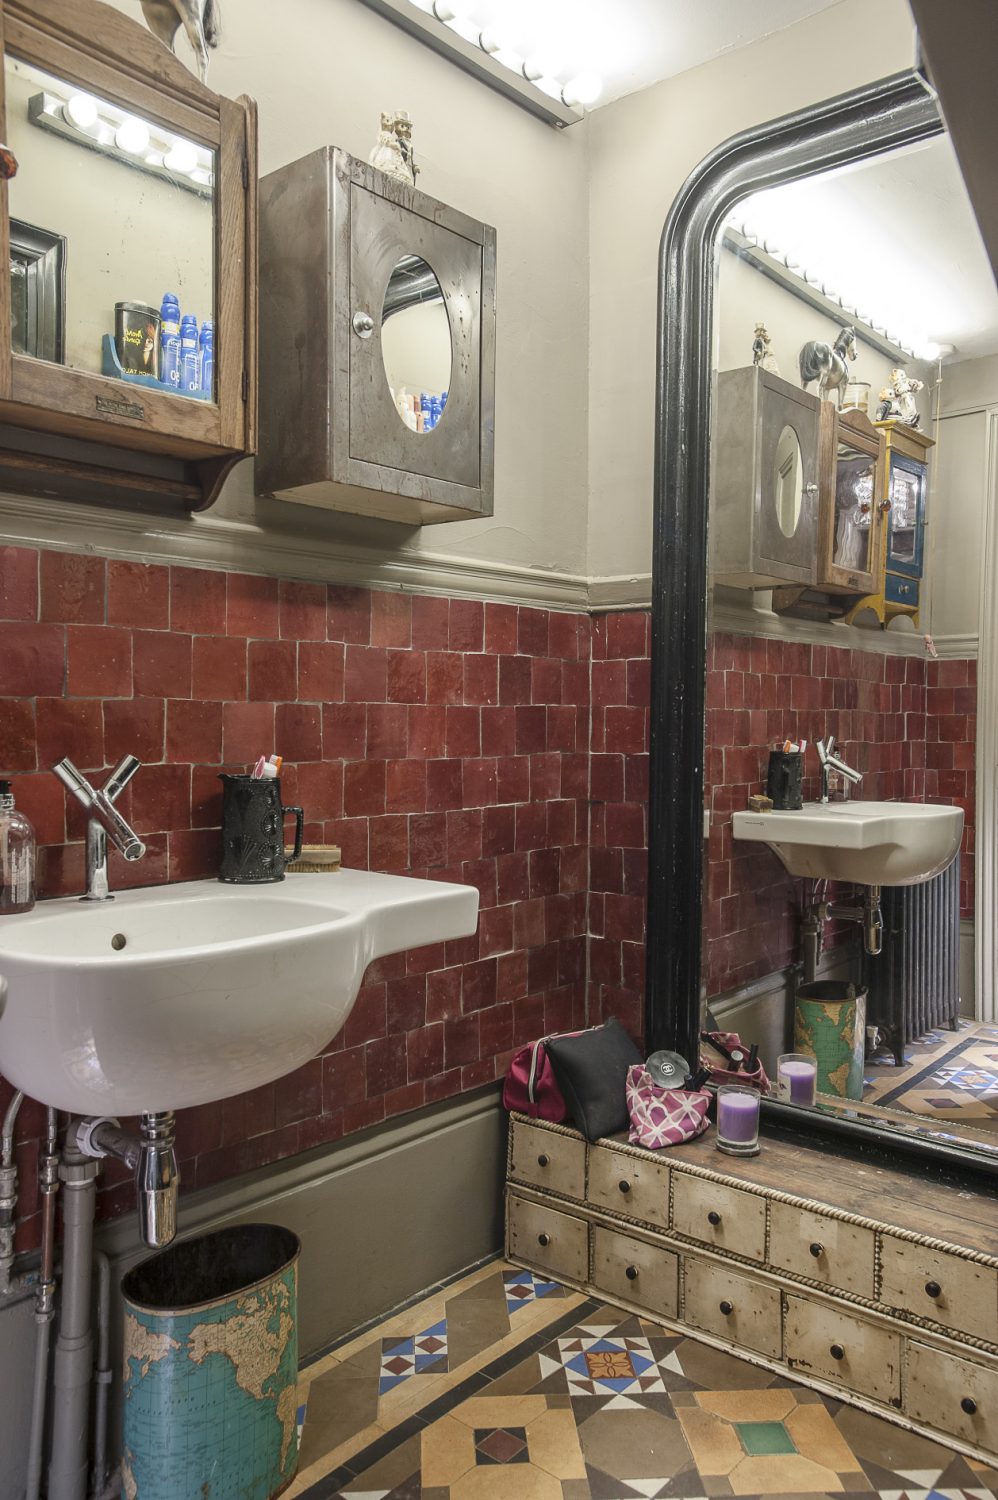 The couple fashioned the bathroom from a former utility room